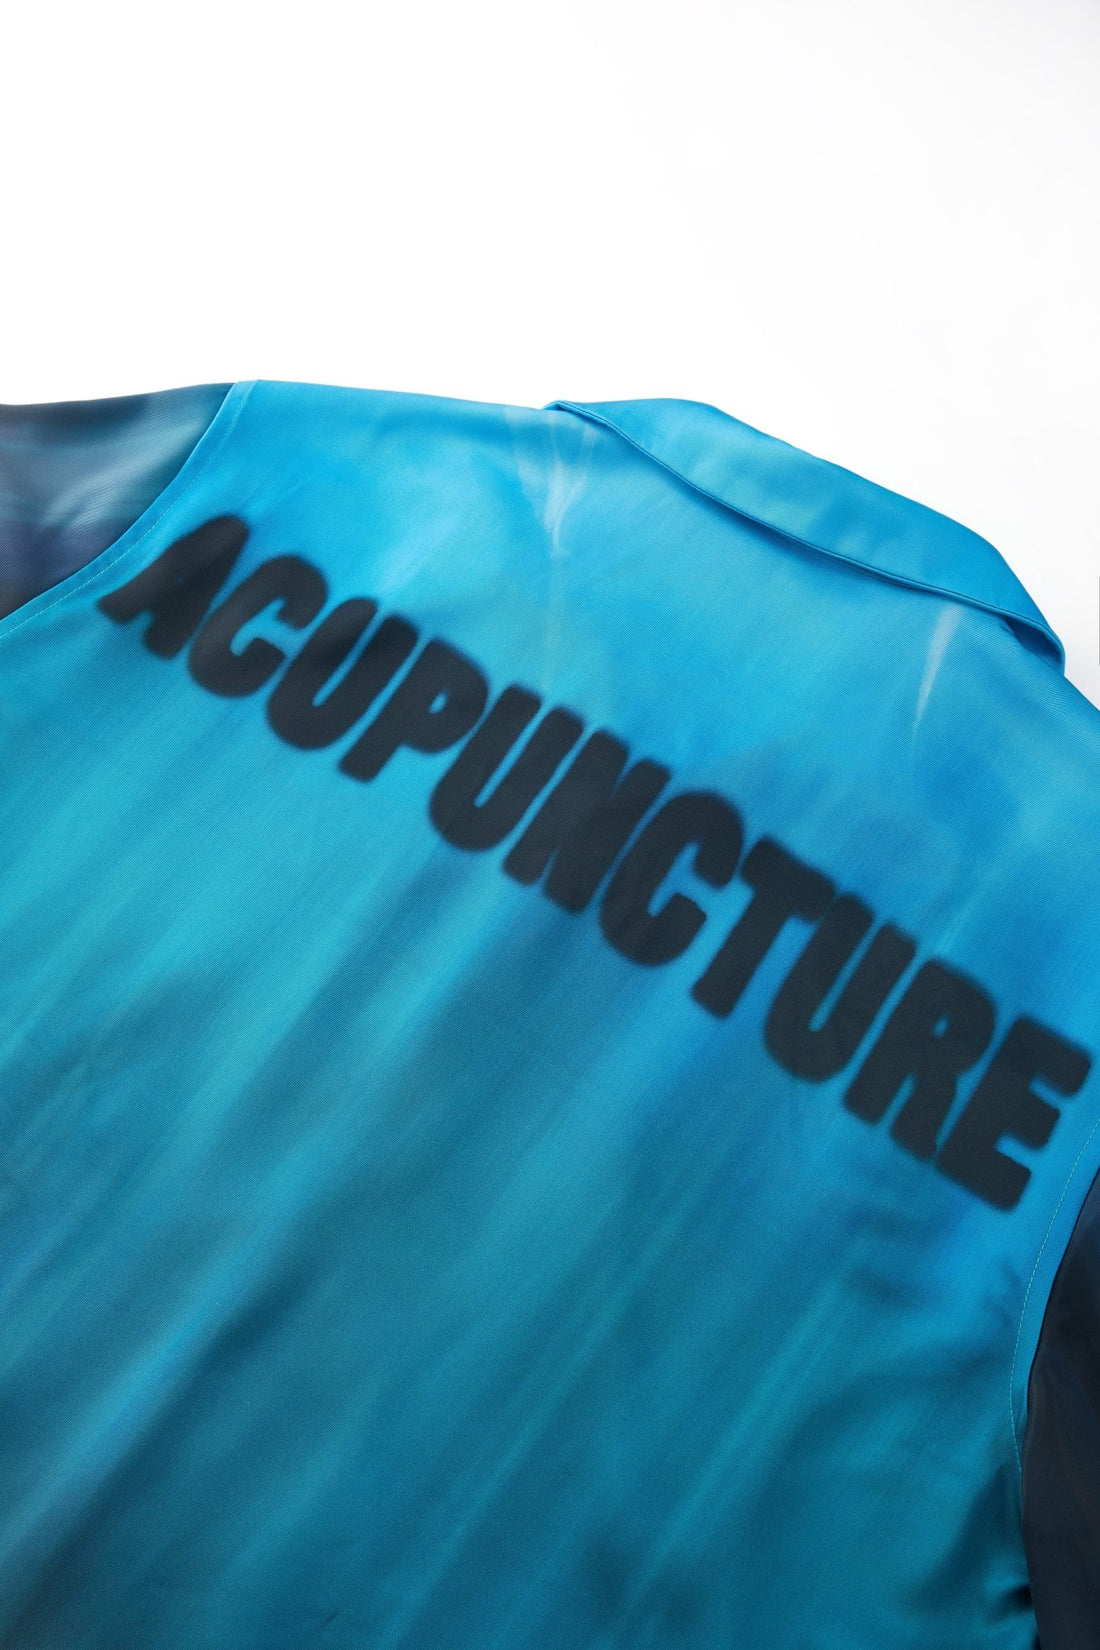 SKYLINE SHIRT MIXED BLUE Acupuncture